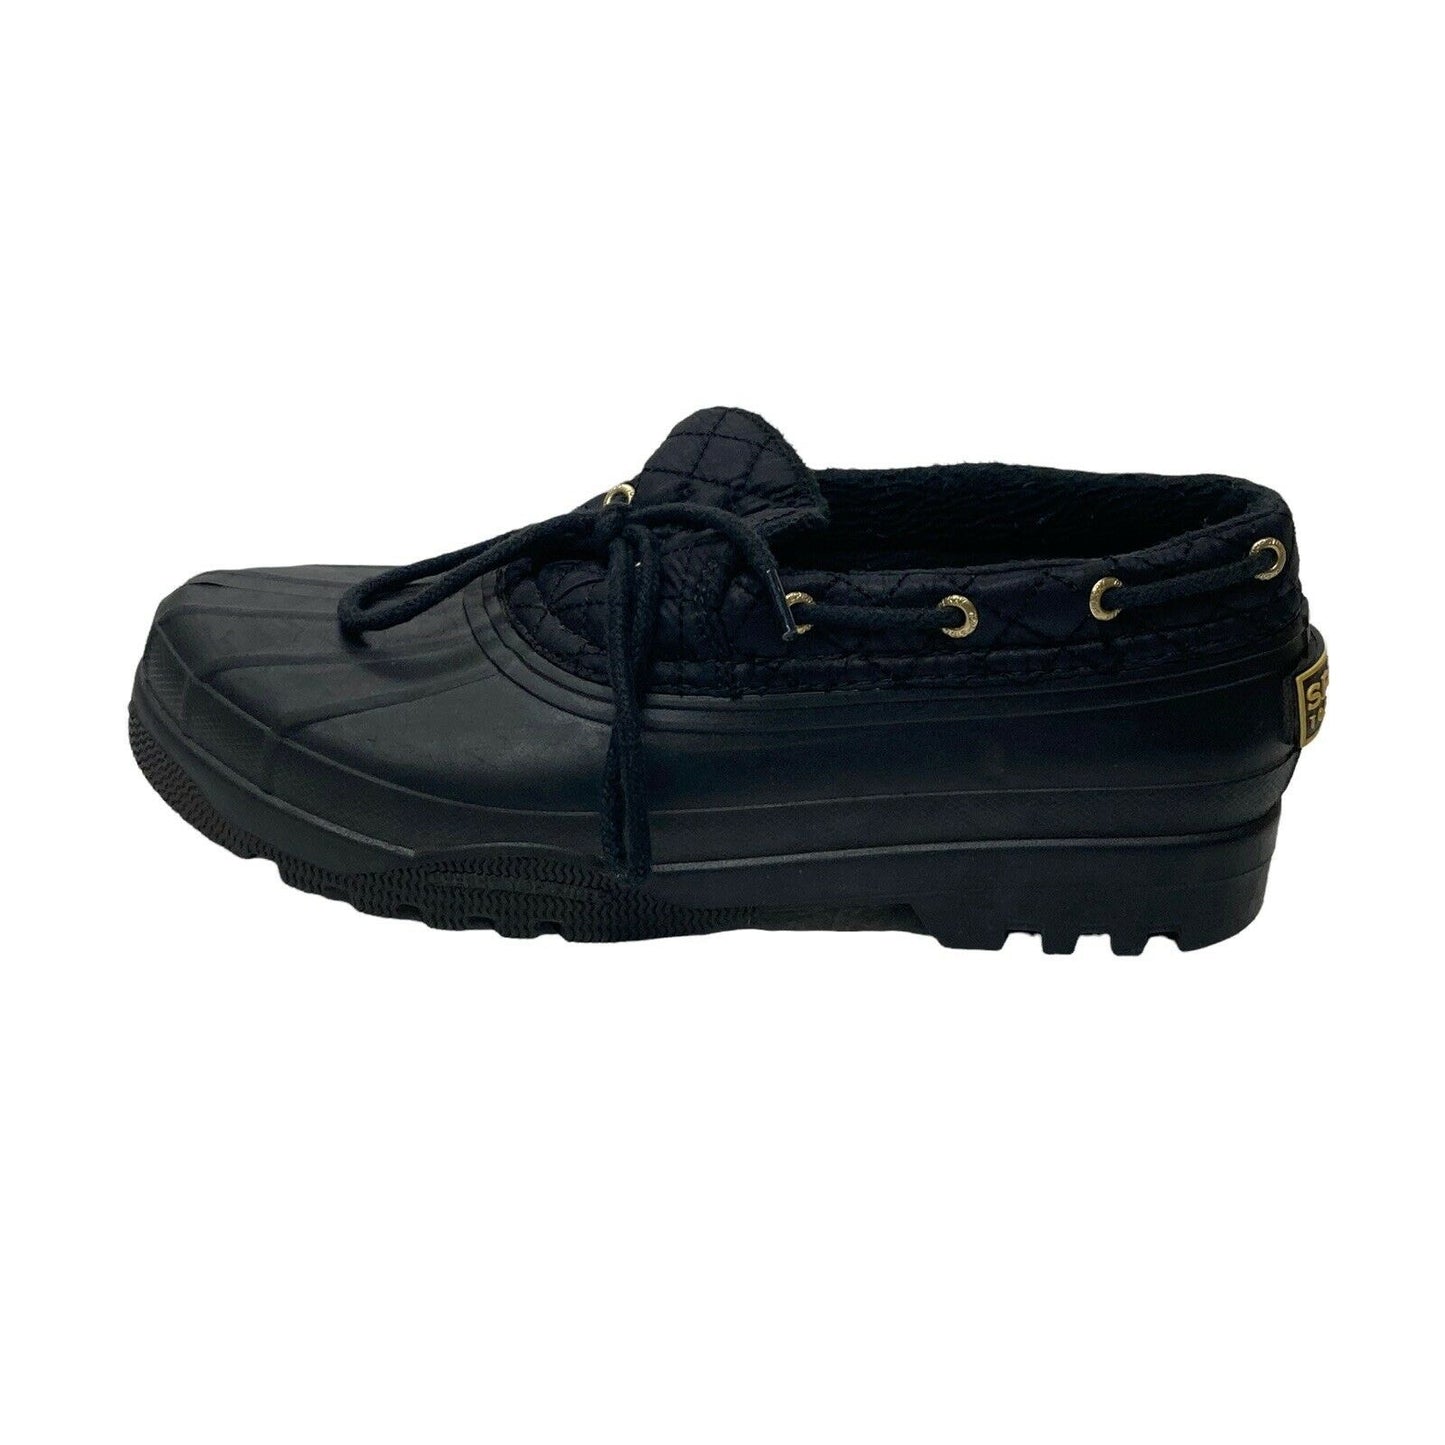 Sperry Top-sider Duckling STS95272 Black Lined Rubber Duck Shoe Women's Size 7